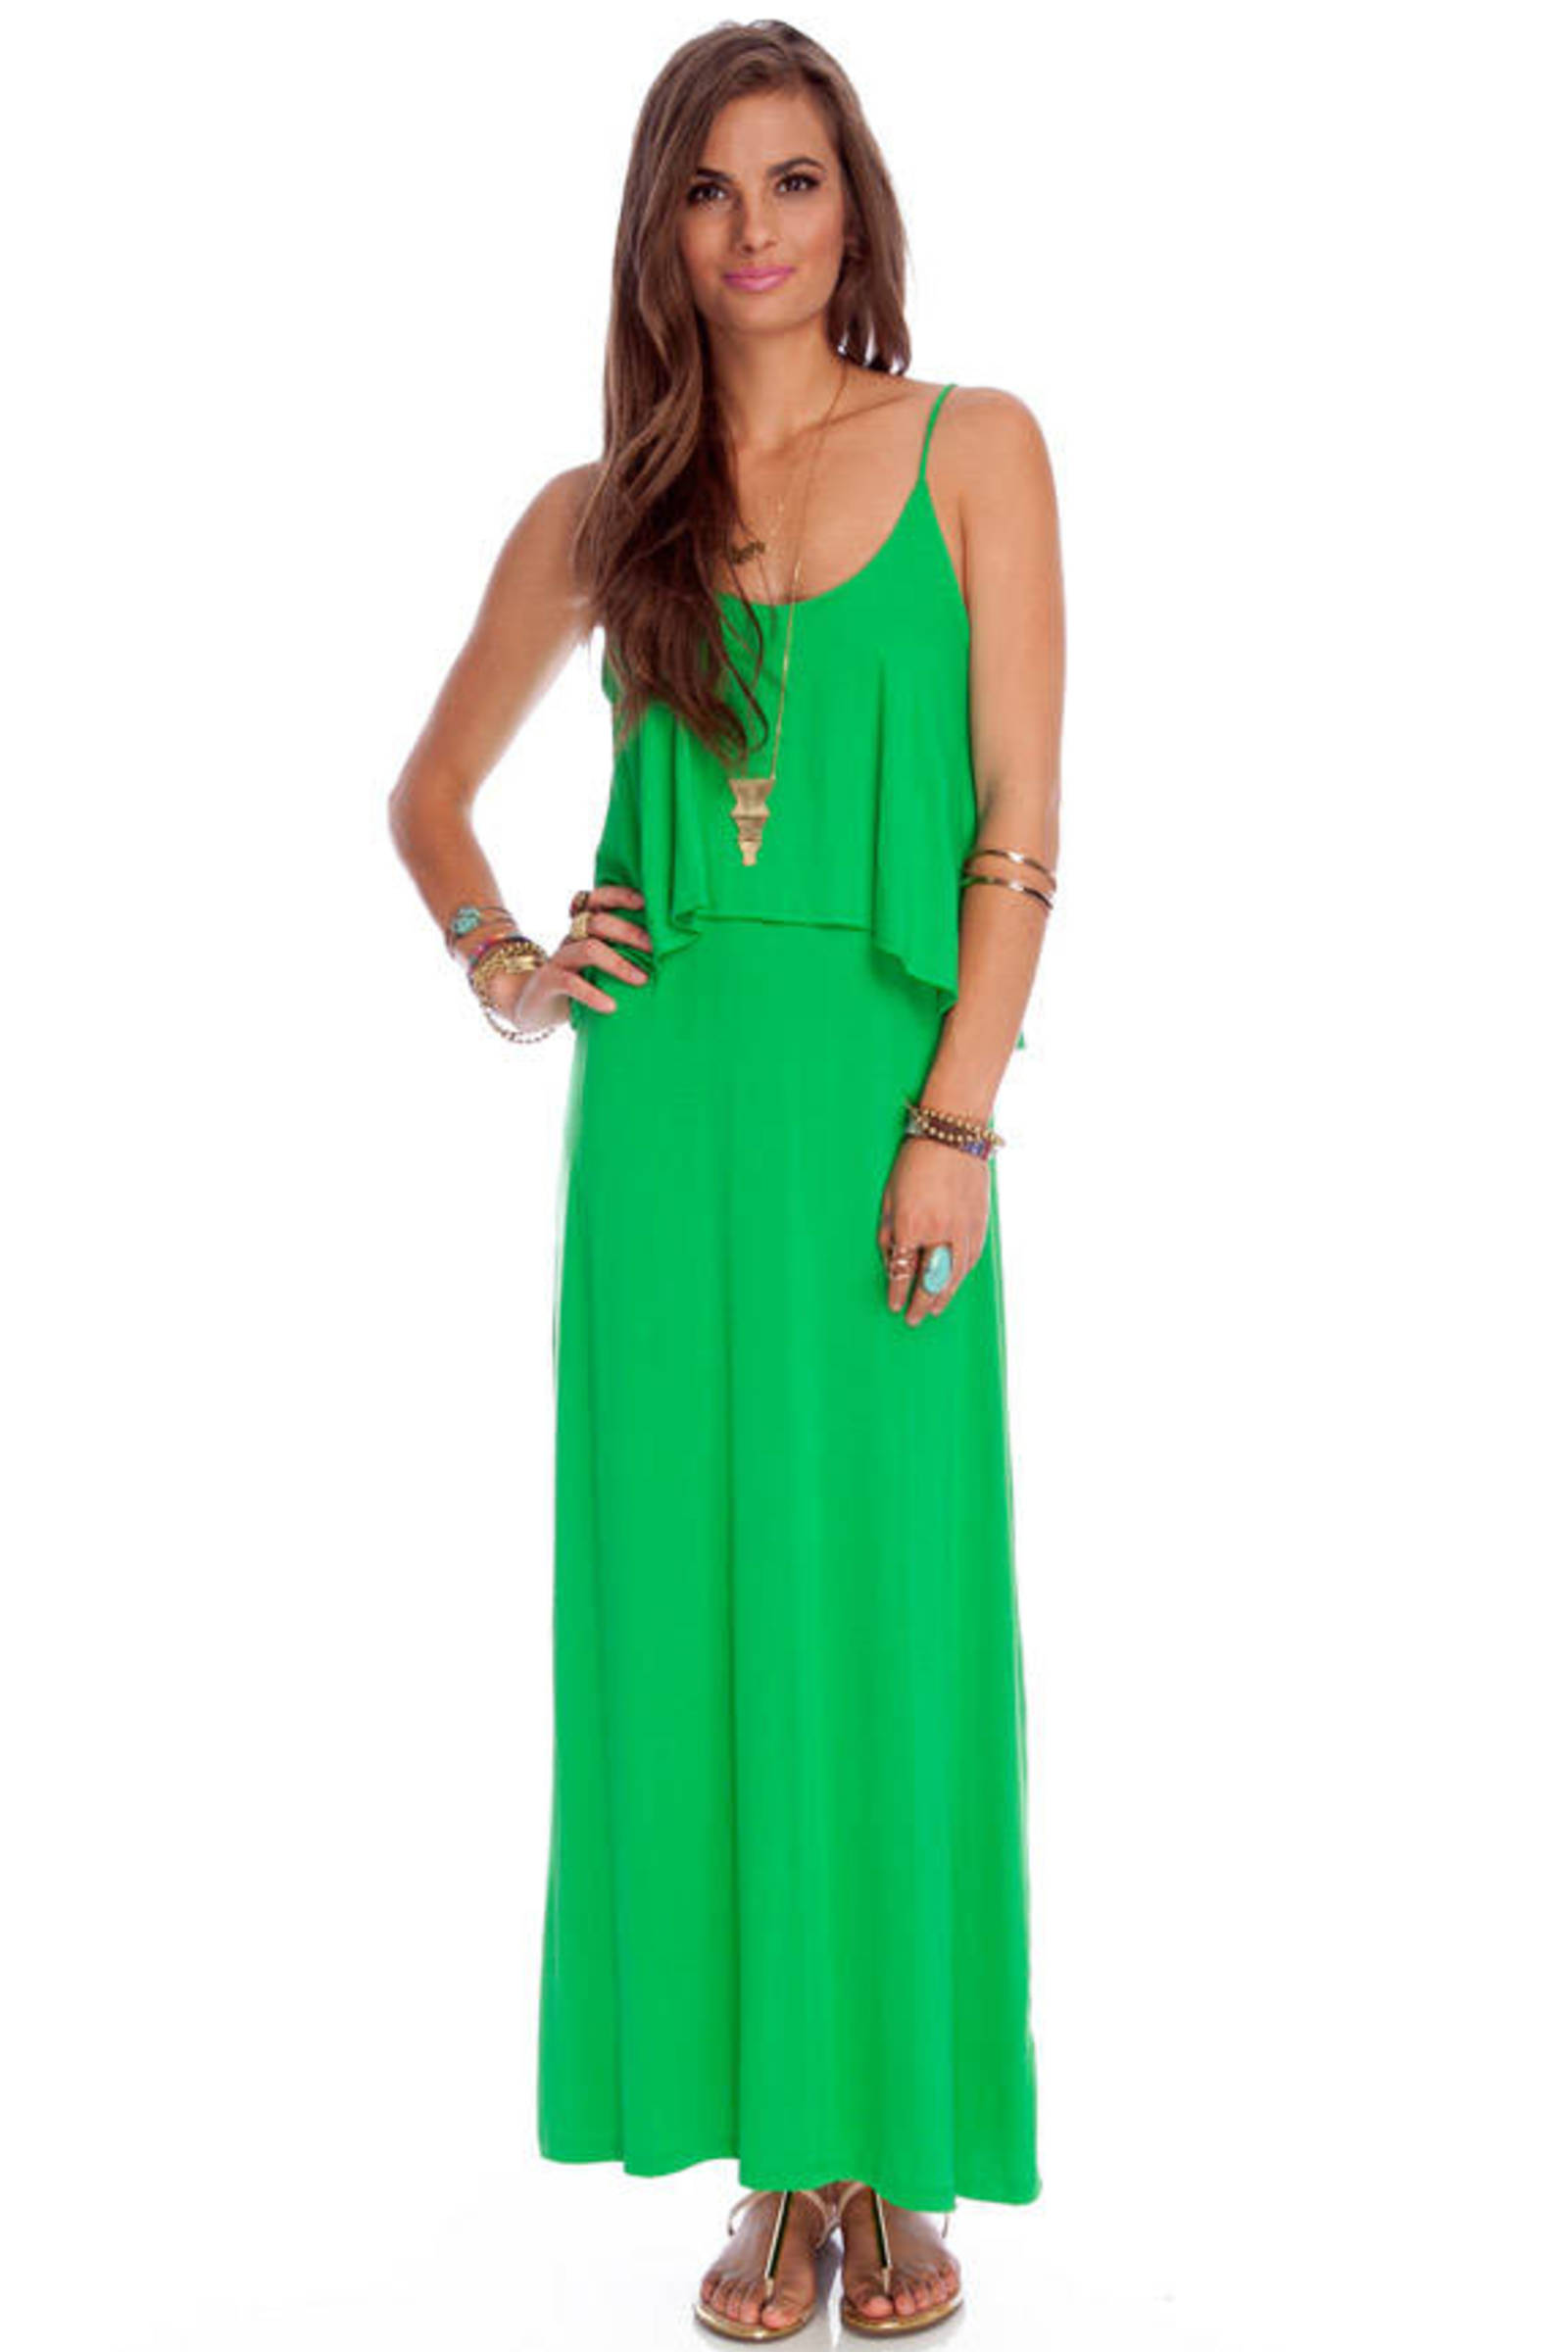 Shed a Tier Maxi Dress in Kelly Green - $41 | Tobi US